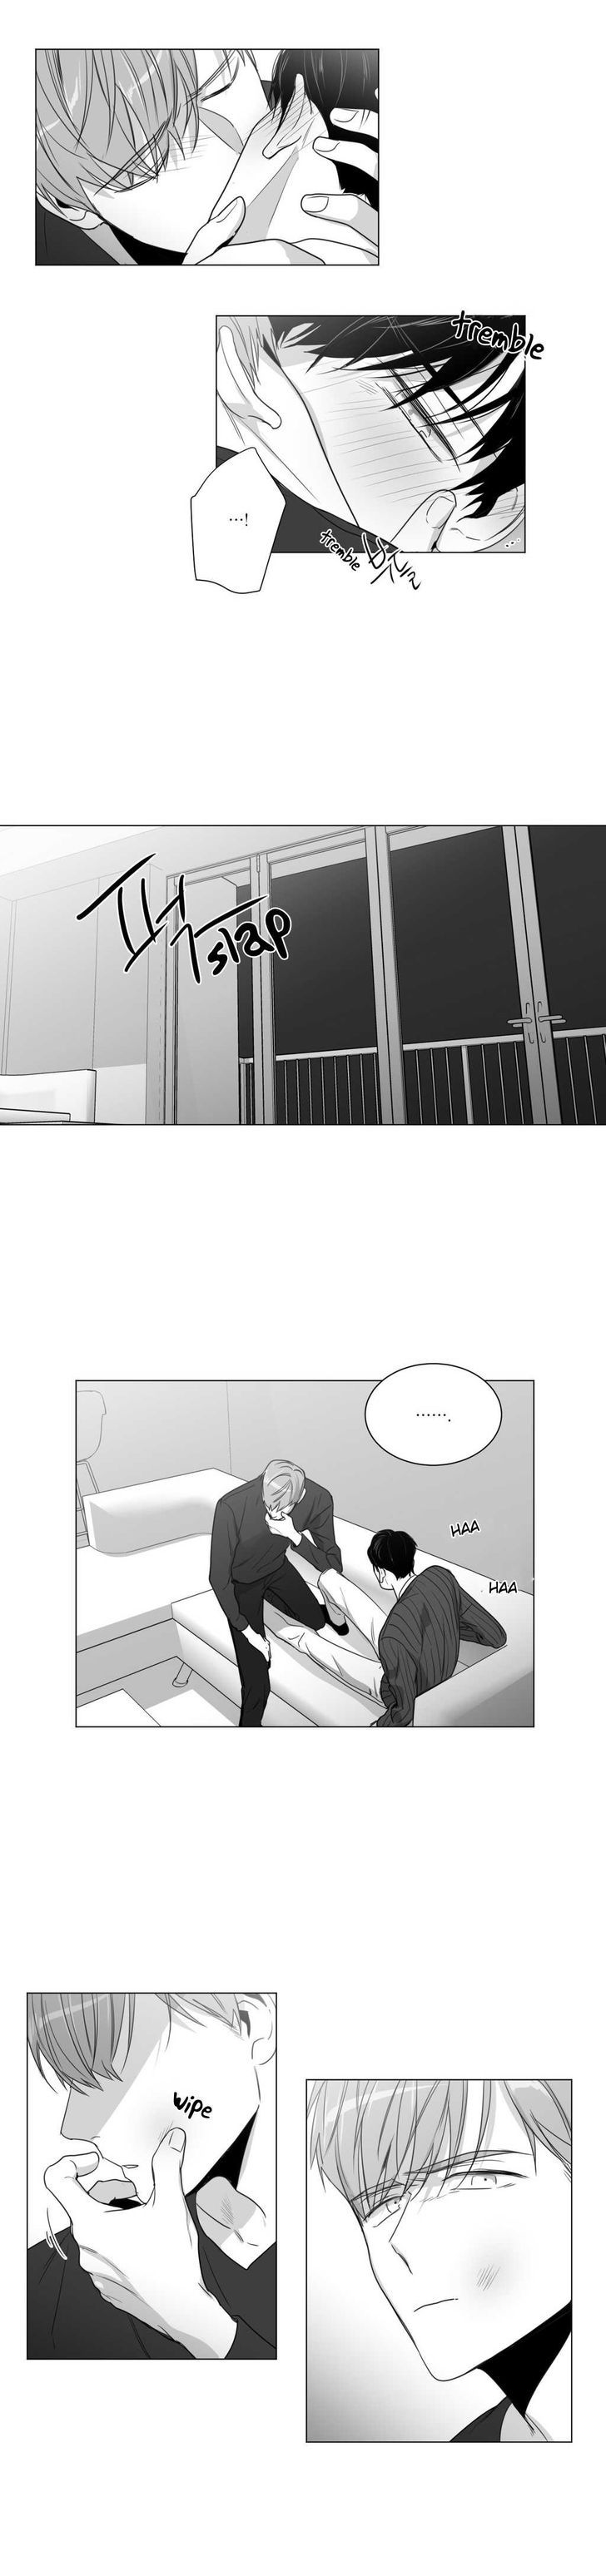 Lover Boy (Lezhin) Chapter 028 page 4